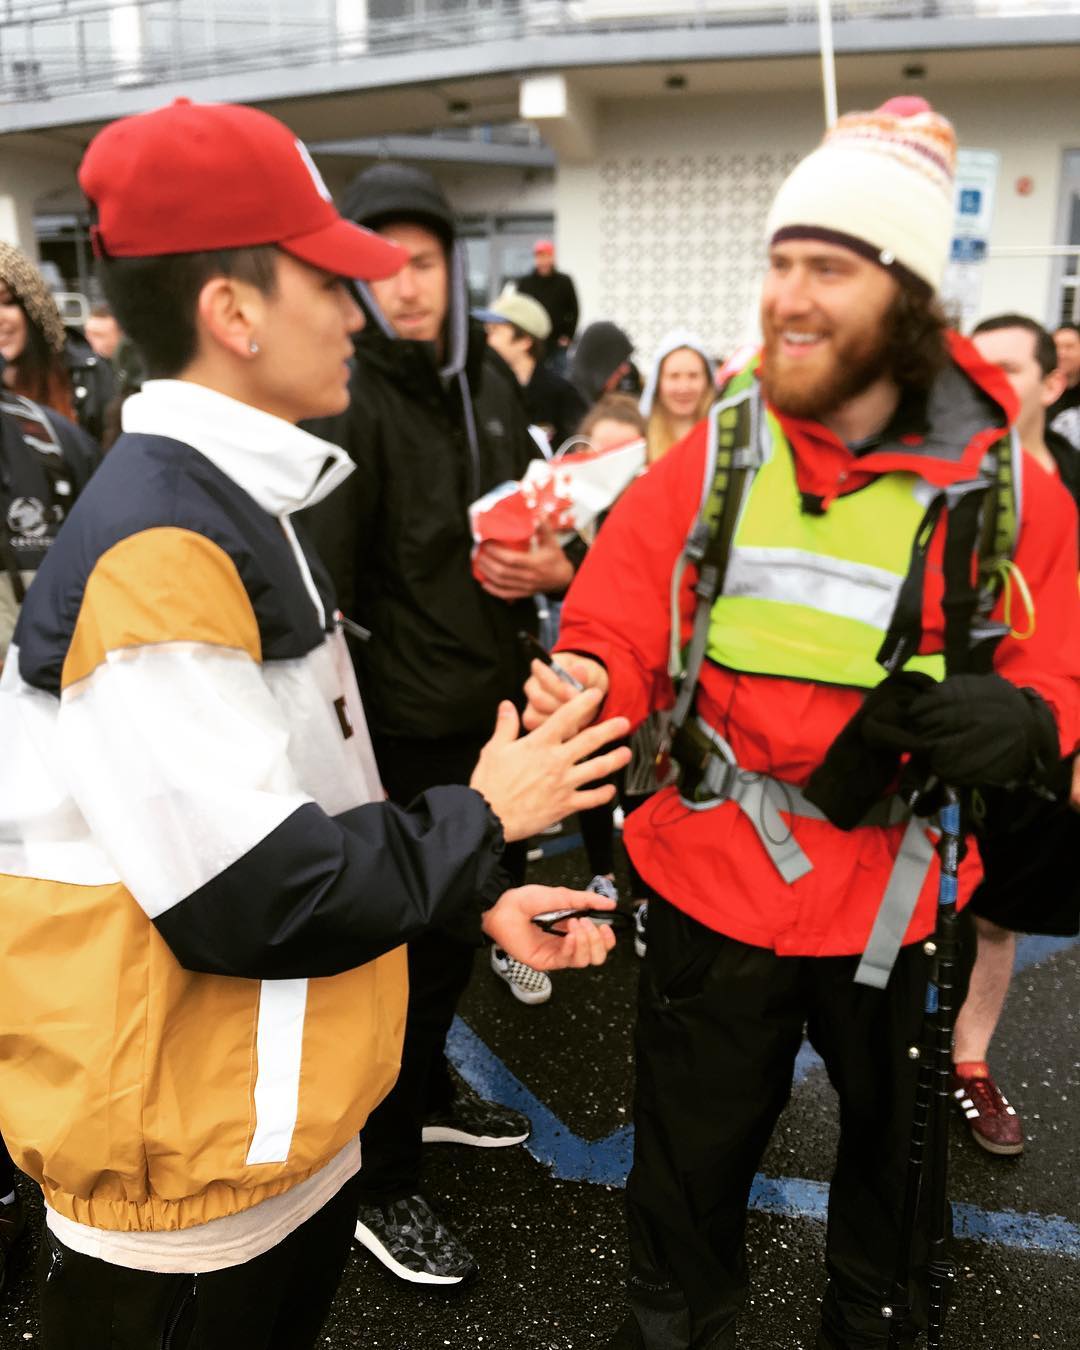 Mike Posner in Asbury Park, NJ on April 15, 2019
Photo credit: instagram.com/ebeofficiall
